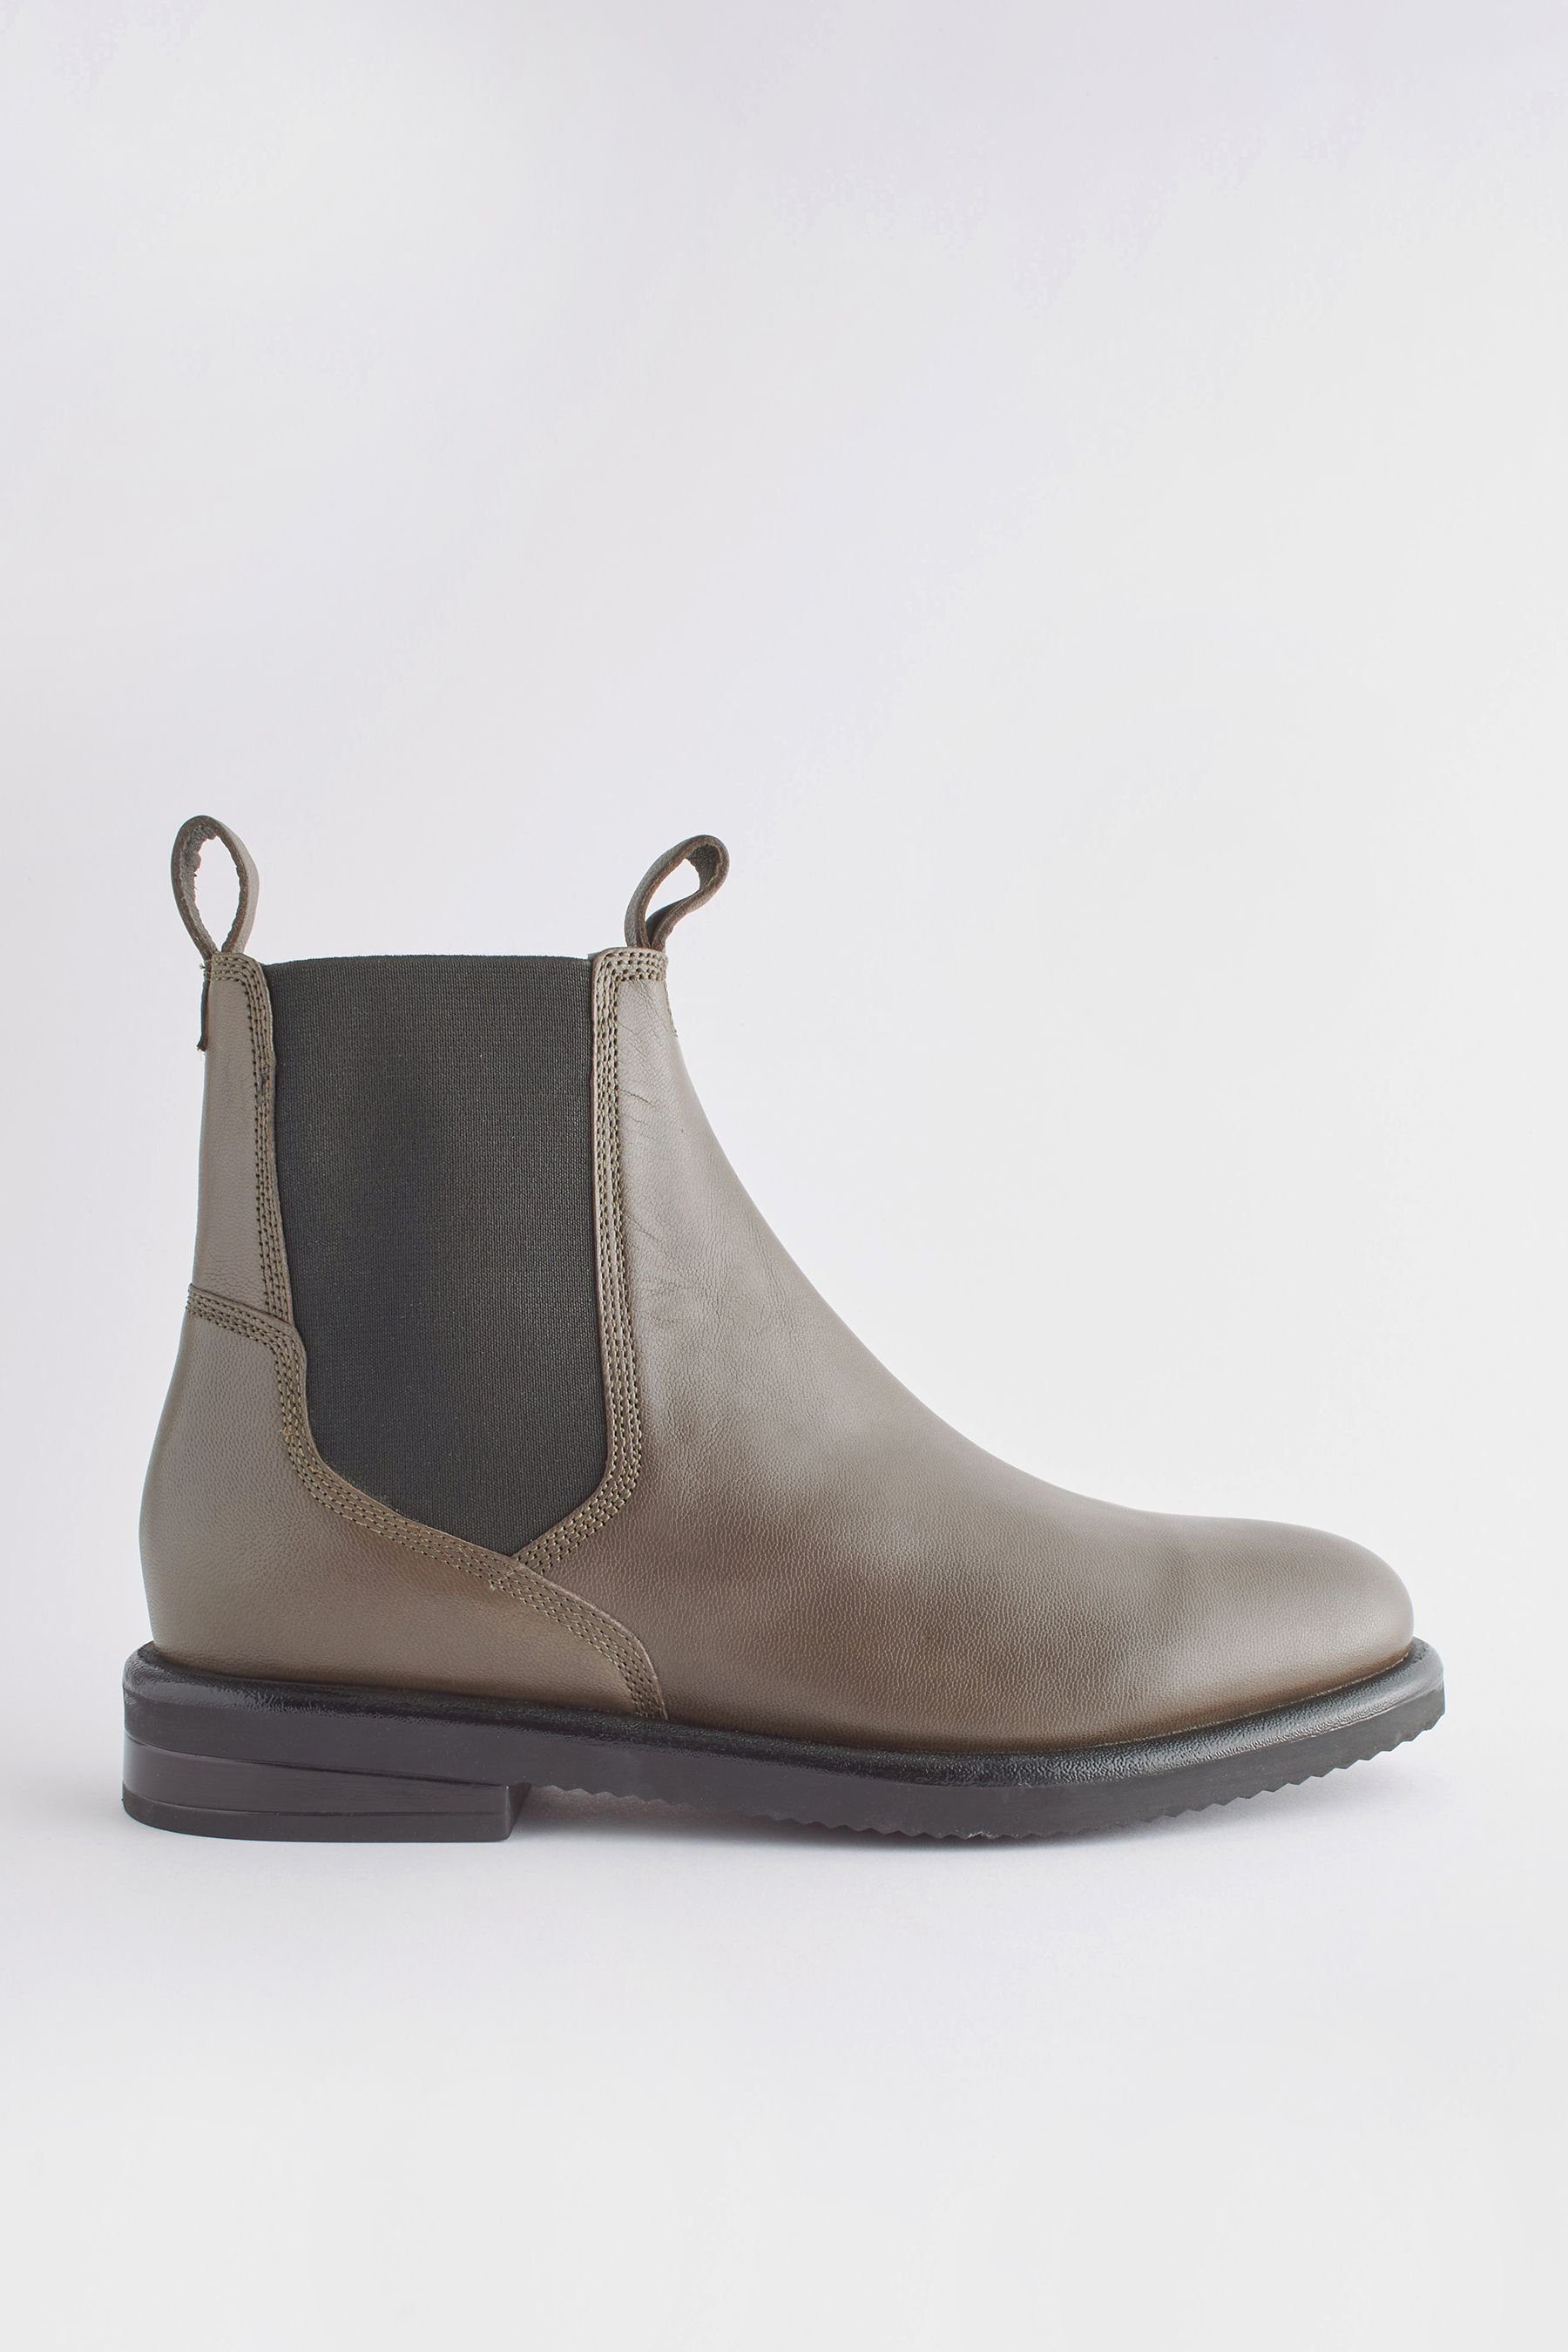 Passform Forever Khaki Chelseas, Green extra weite (1-tlg) Comfort Chelseaboots Next